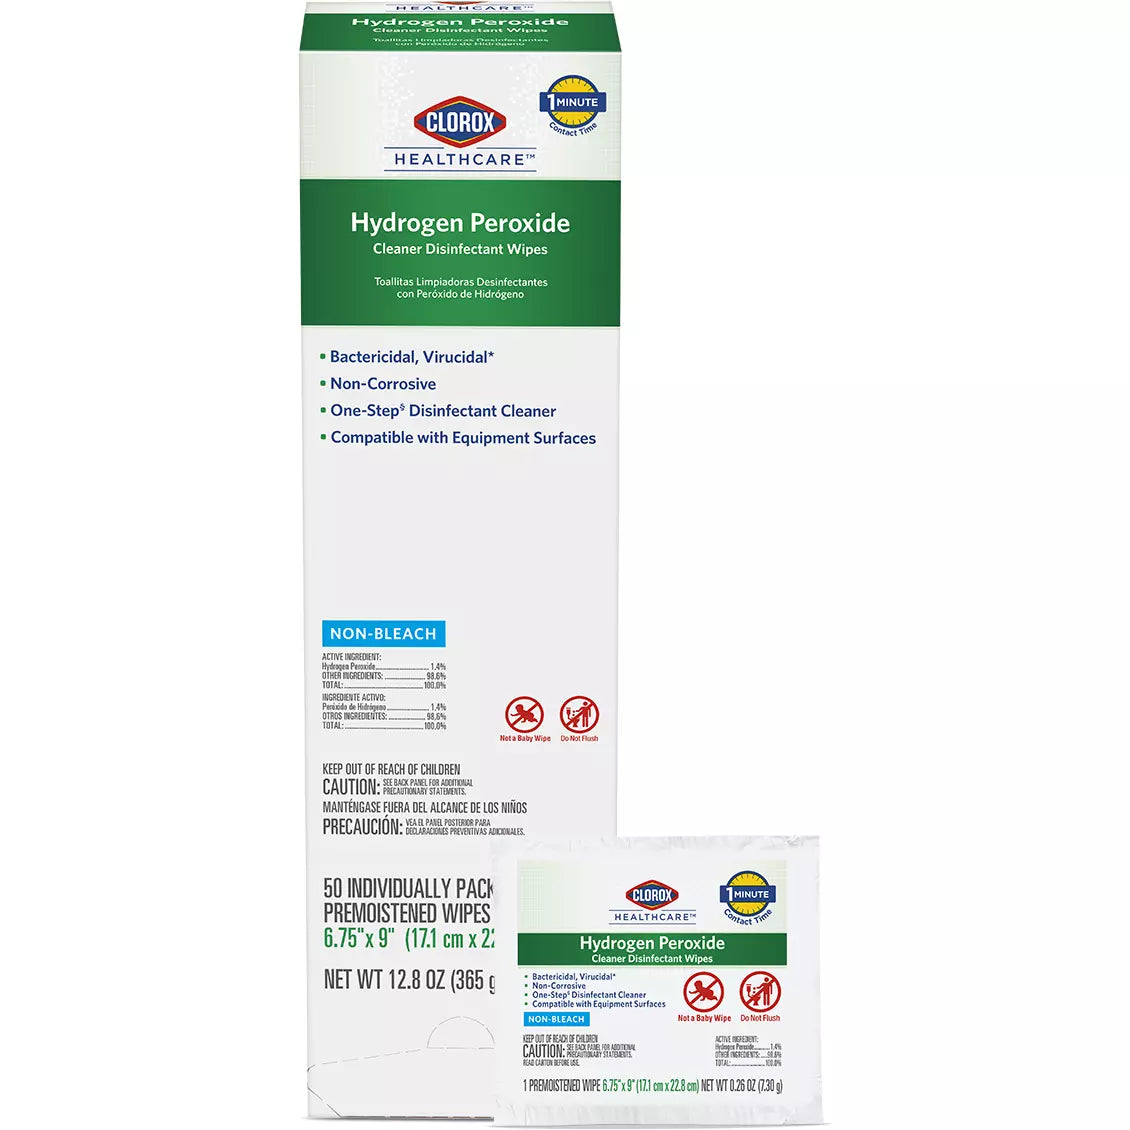 Clorox Healthcare Hydrogen Peroxide Cleaner Disinfectant HCH 30824